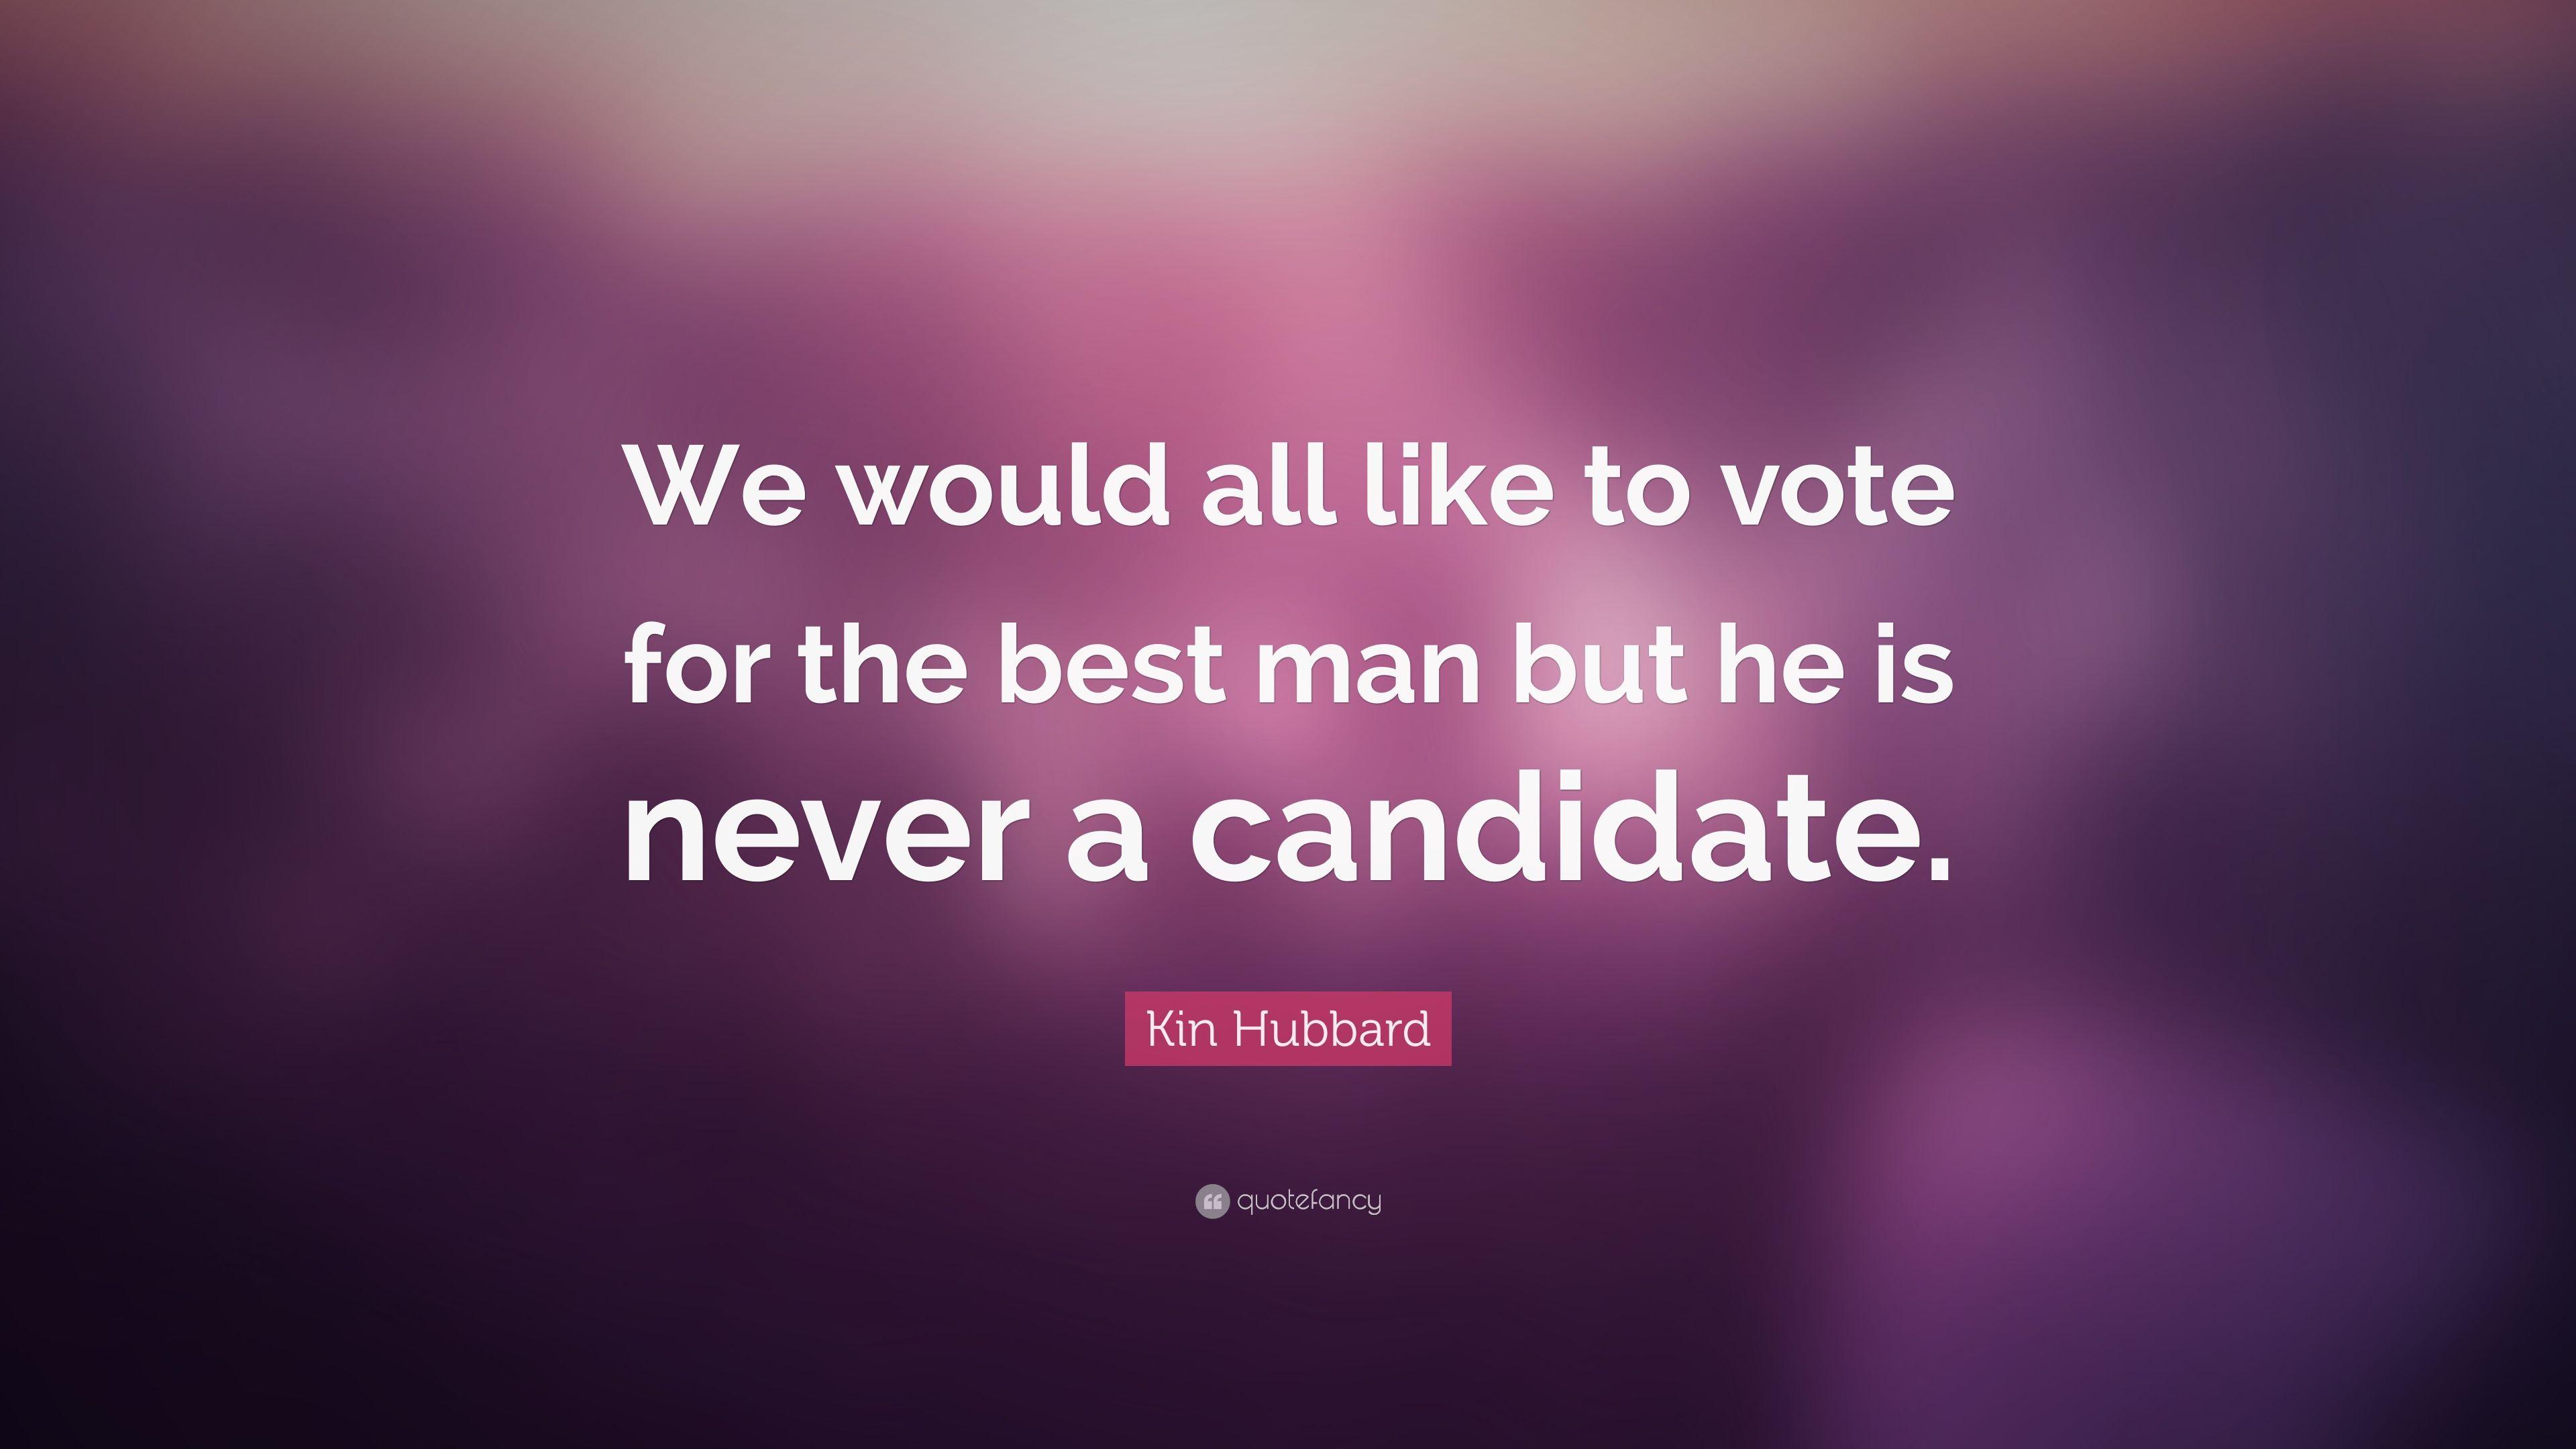 Kin Hubbard Quote: “We would all like to vote for the best man but